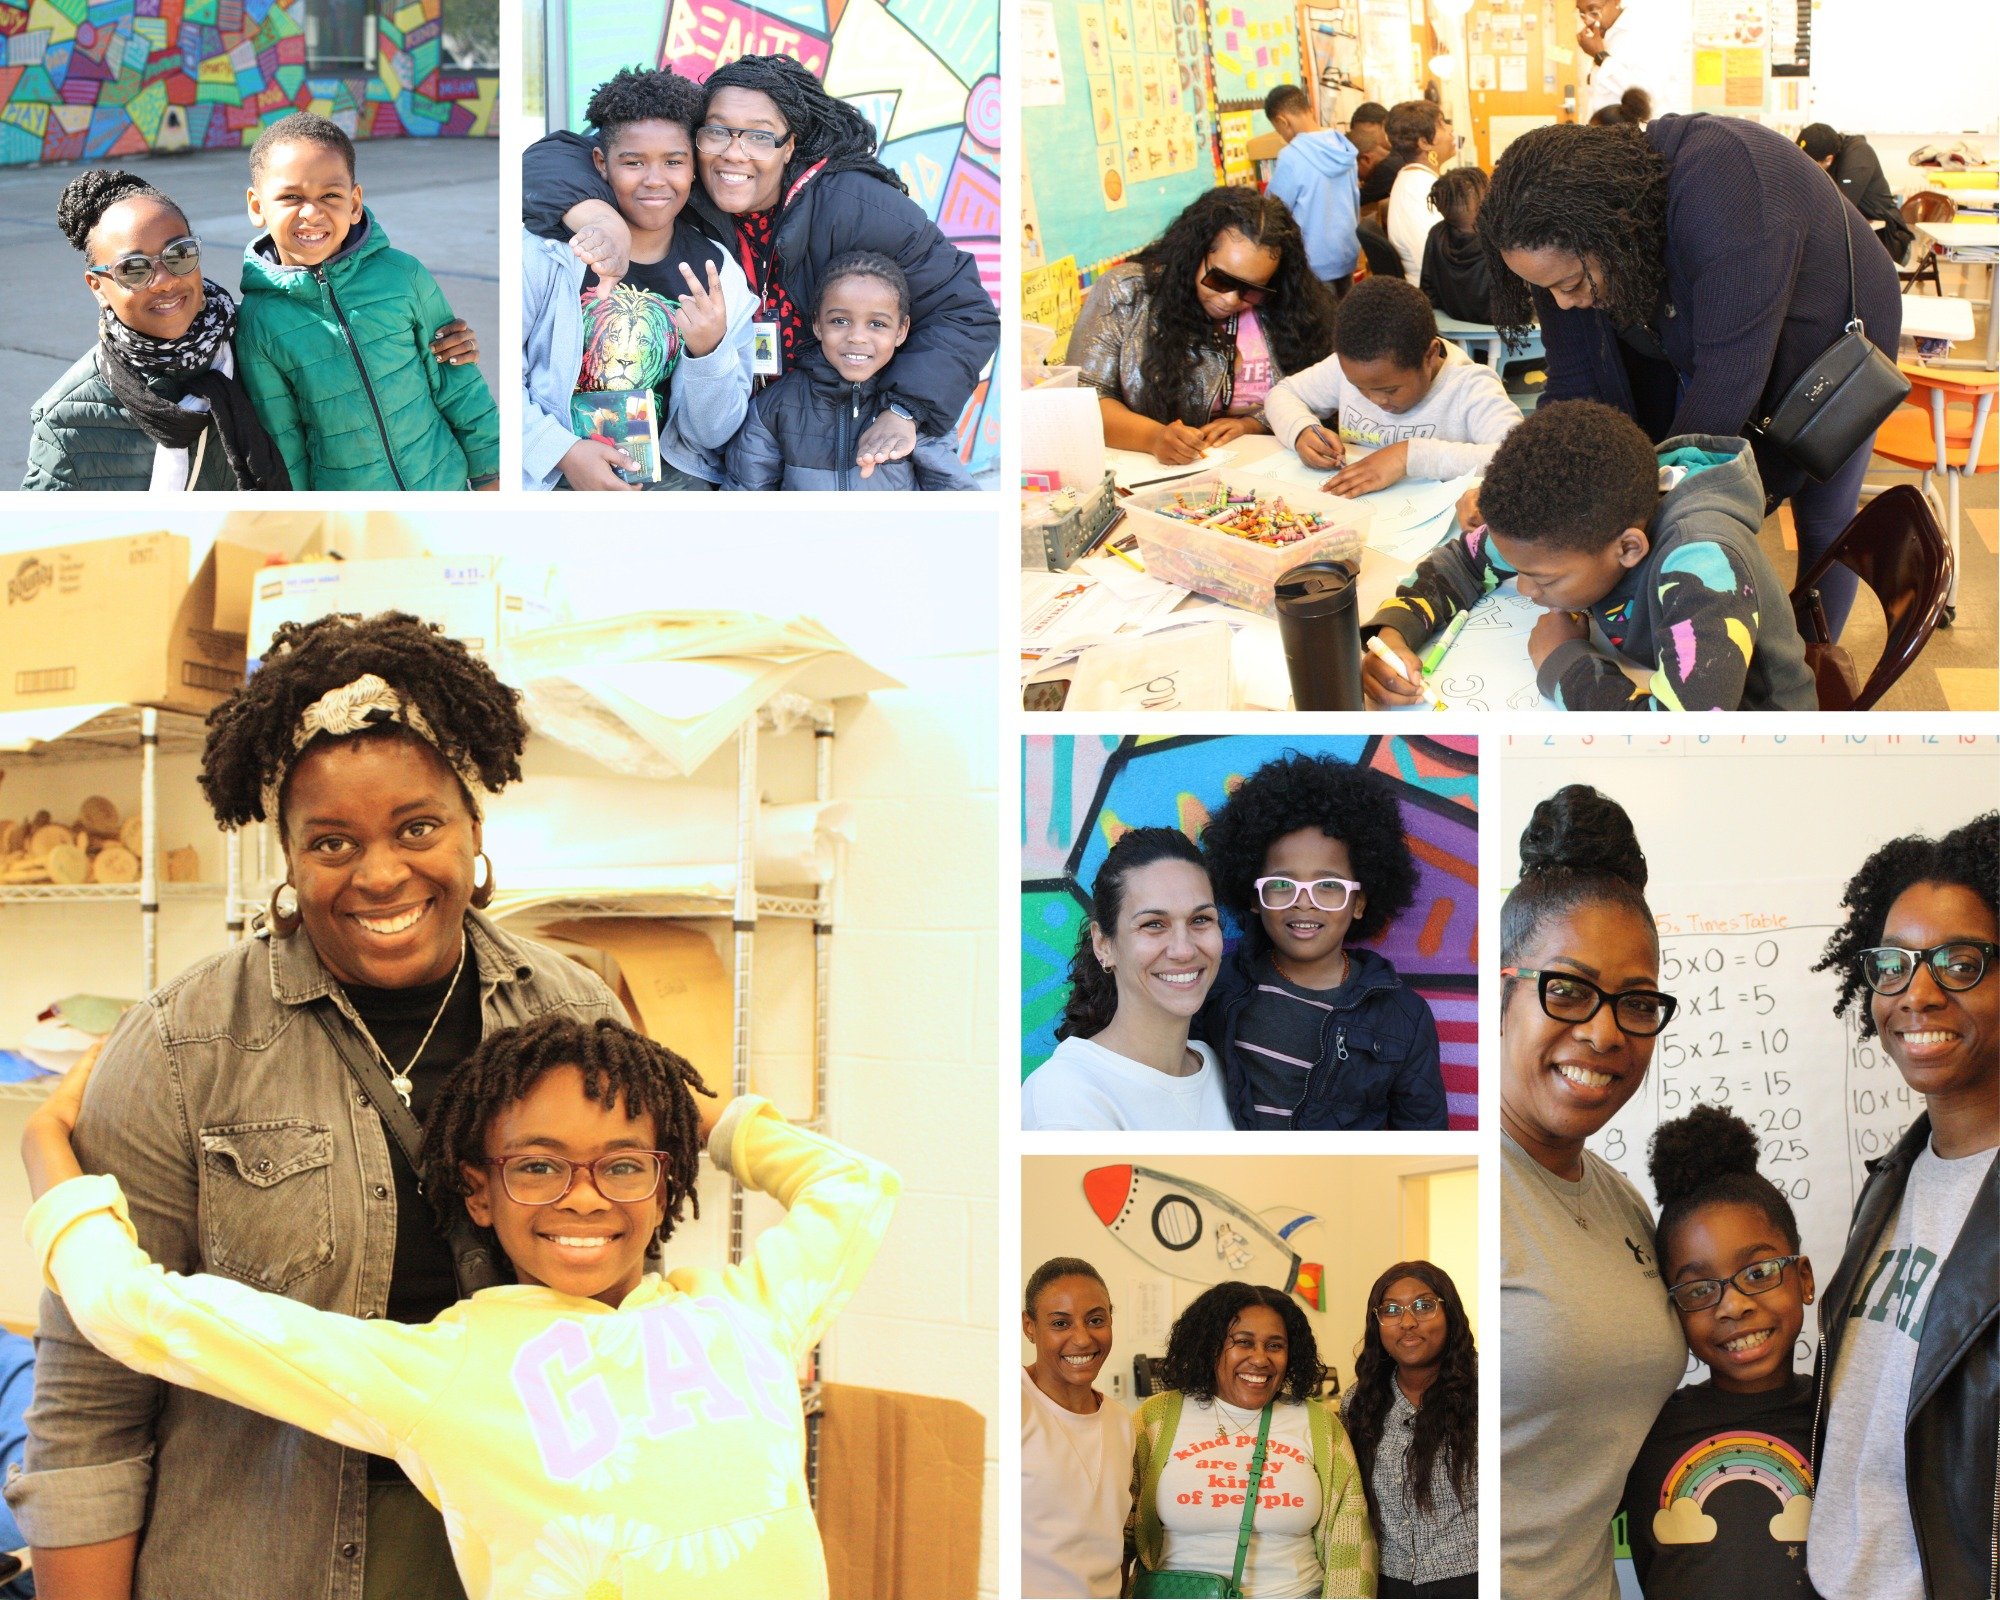 🌟 Last Friday, CPS hosted Moms and Muffins, treating our amazing moms and motherly figures to breakfast before sending them off to get &ldquo;a slice of life,&rdquo; as Mr. Jones says, at school. Your tireless efforts in nurturing your children cont